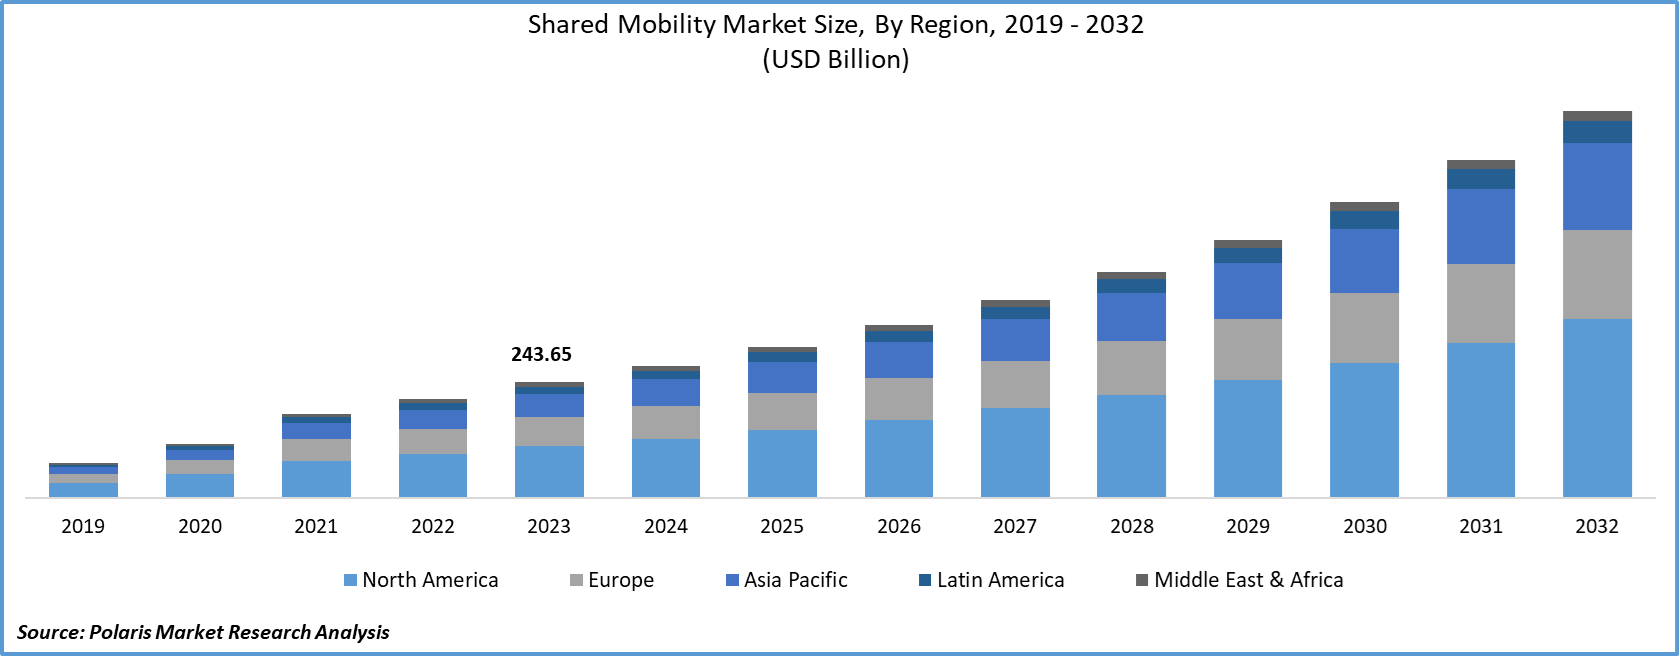 Shared Mobility Market Size